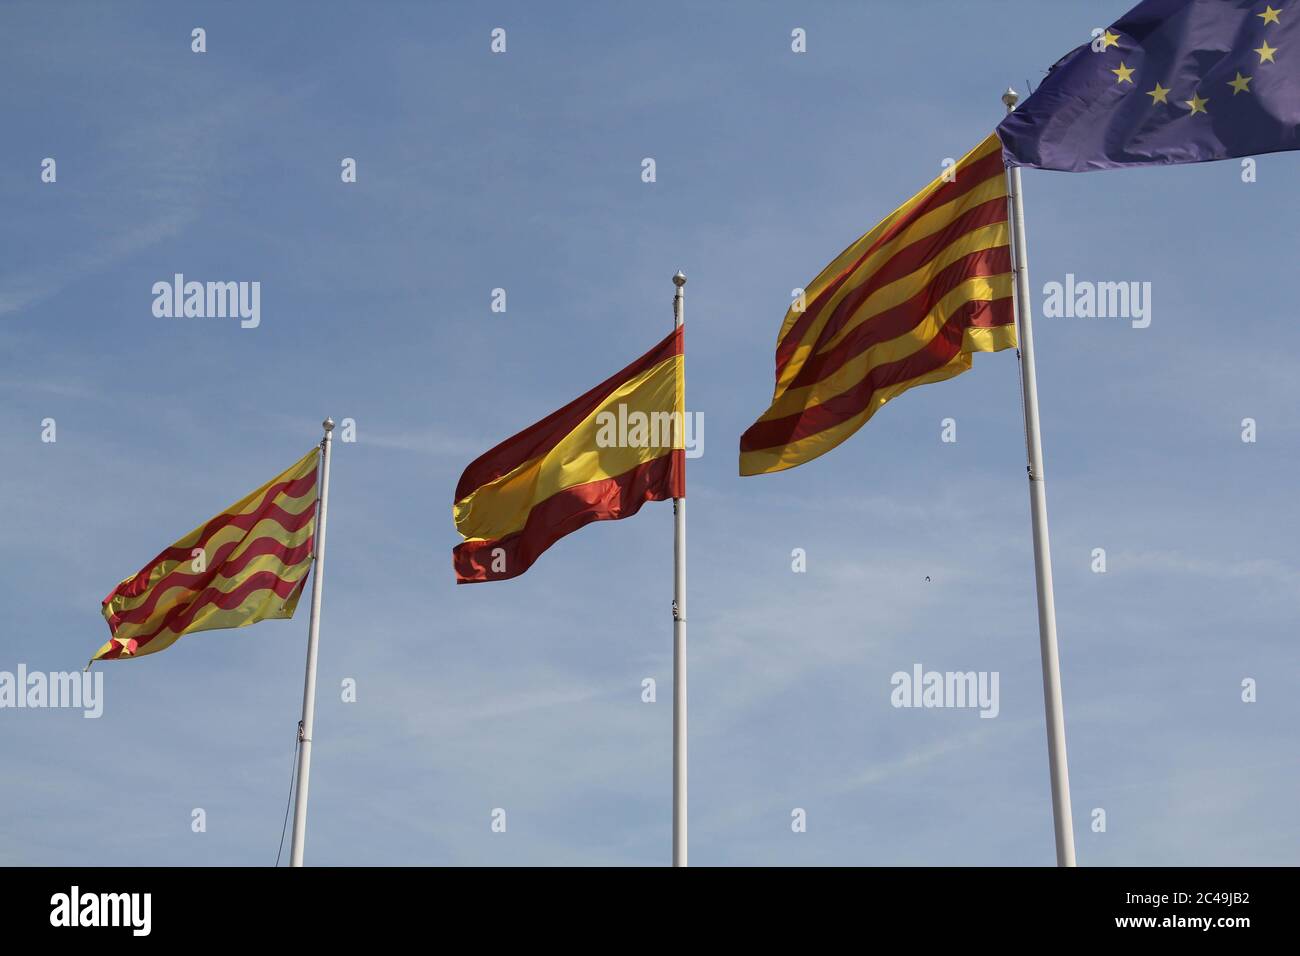 Flags of Spain, Catalonia, and the European Union waving in the sky Stock Photo